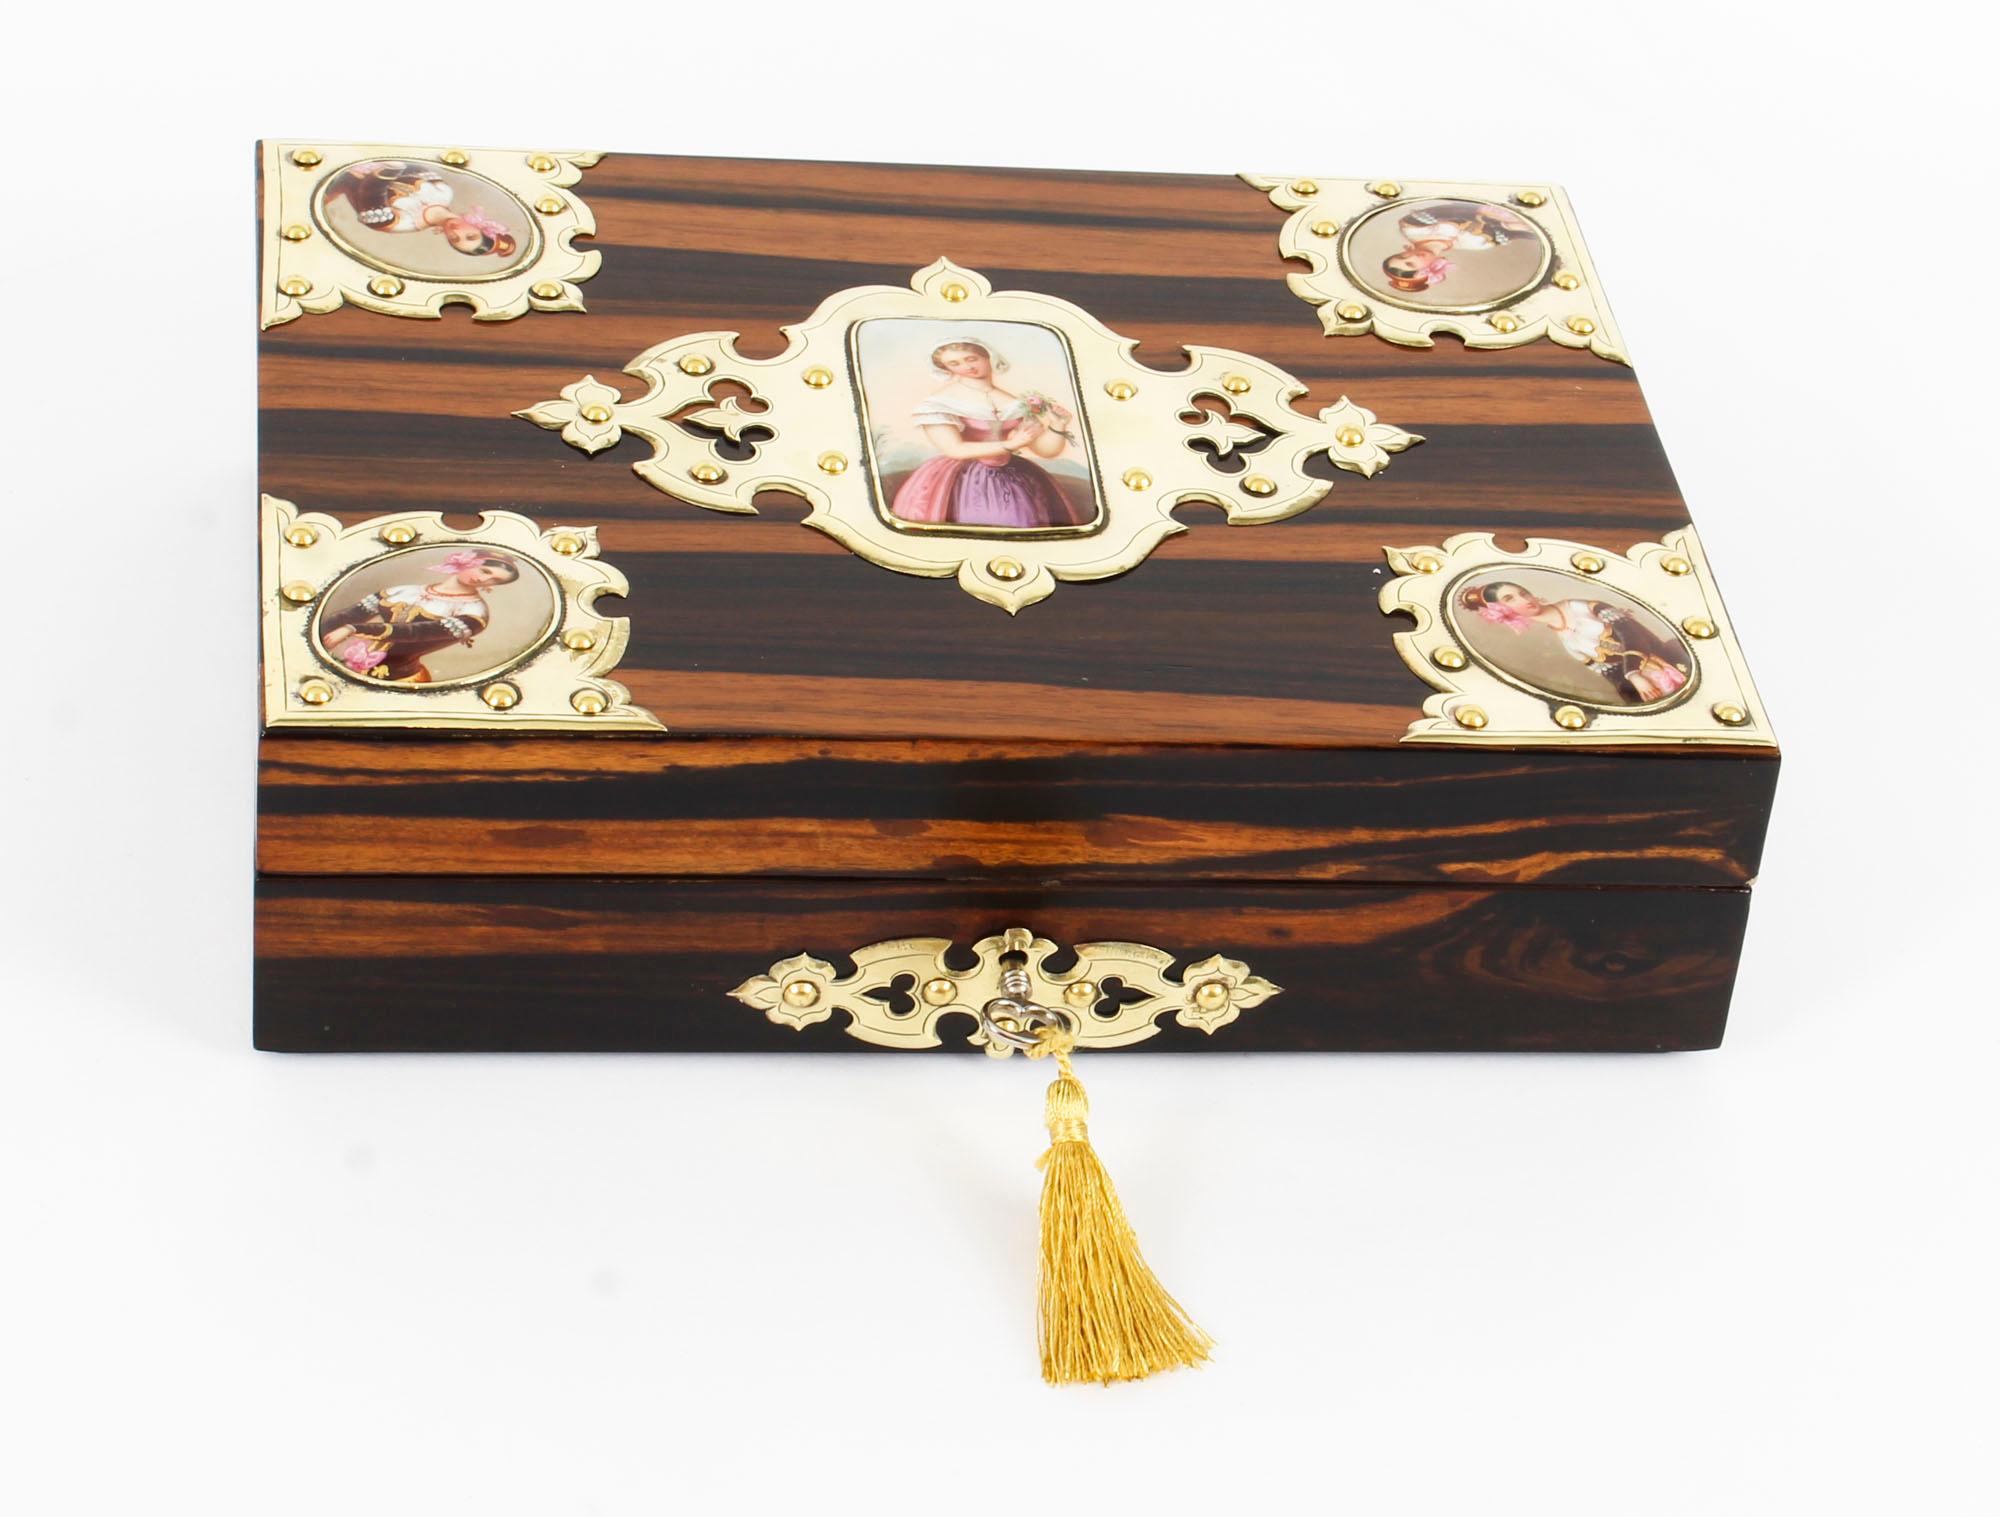 This is a beautiful antique English Victorian coromandel jewellery casket, circa 1880 in date.

The casket lid features five decorative cut brass Neo Gothic mounts containing KPM porcelain plaques depicting classical maidens, and a striking cut